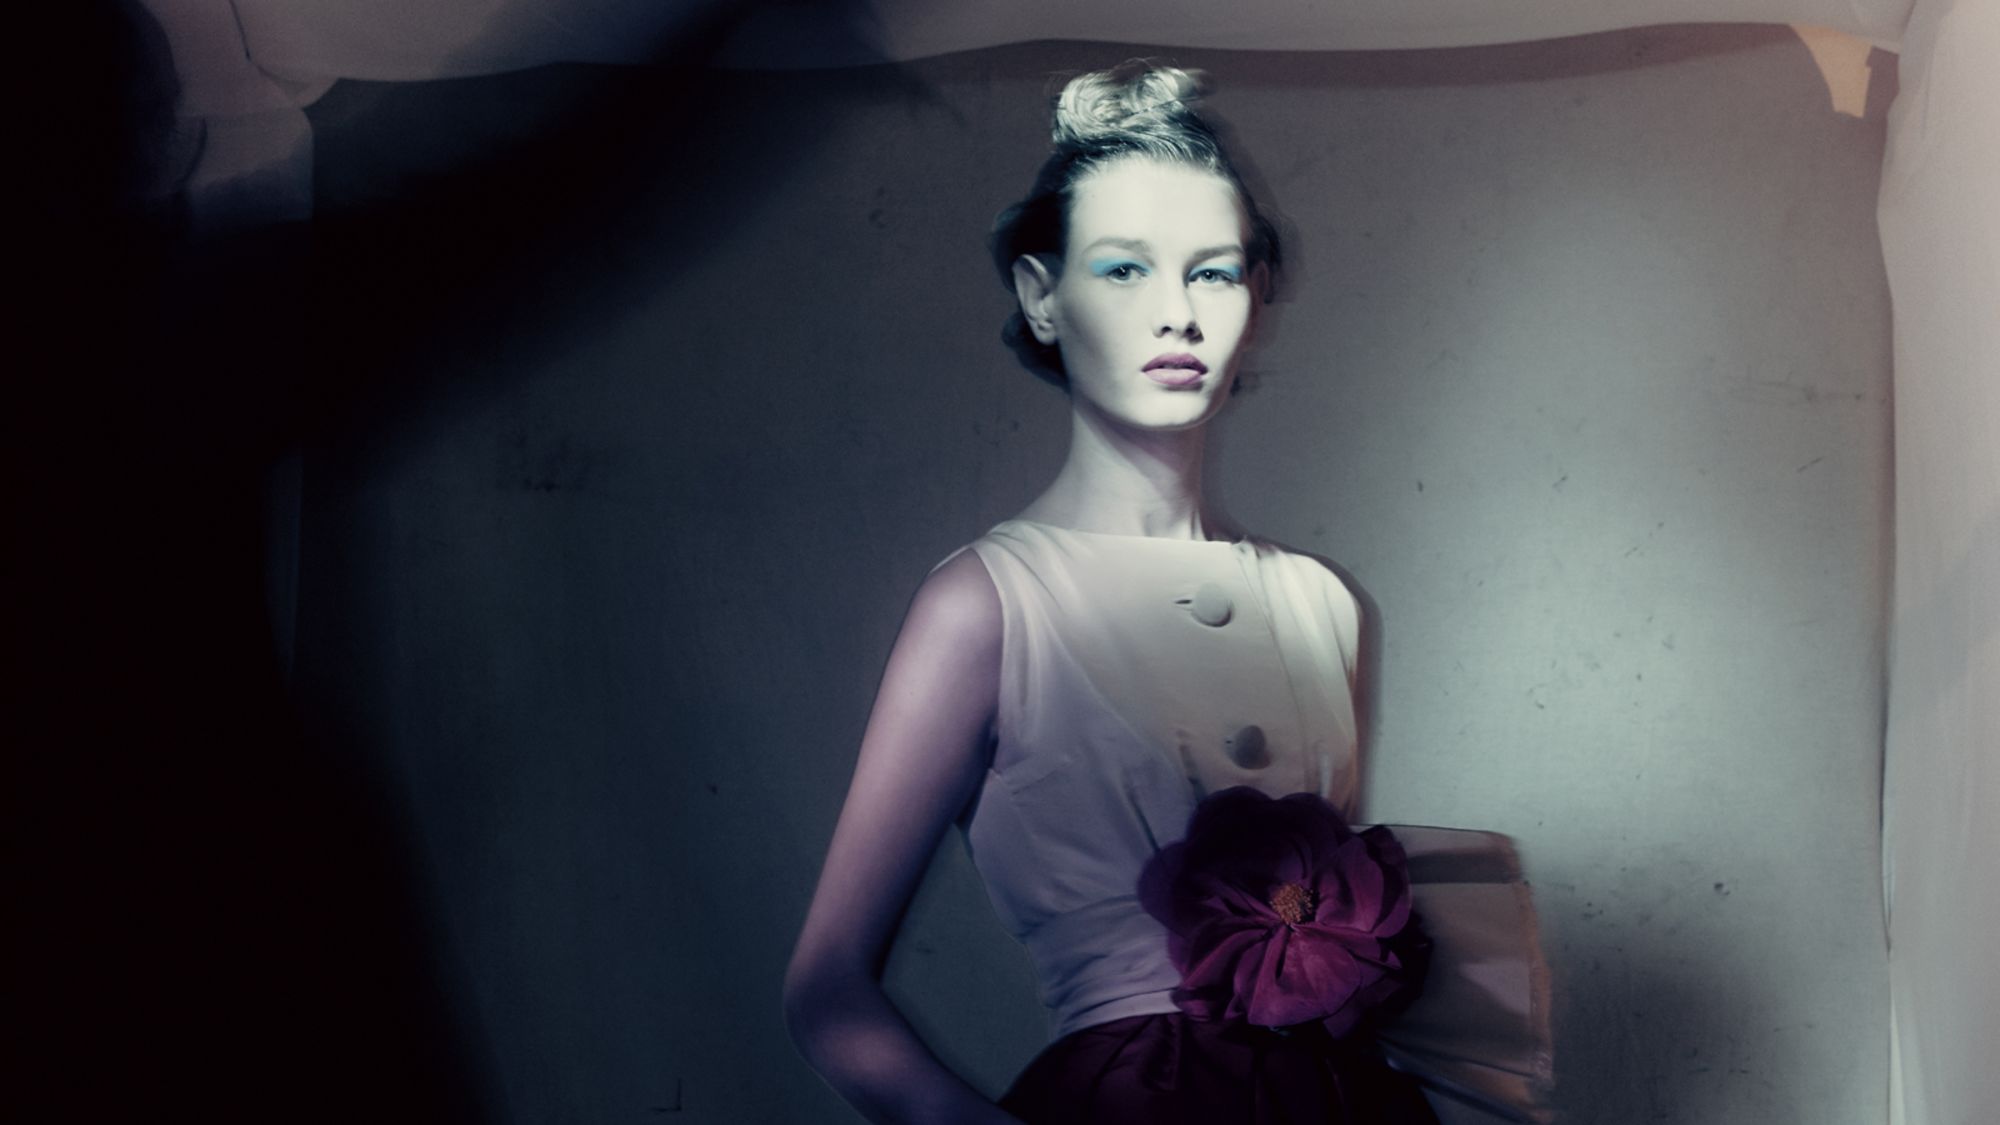 Paolo Roversi's fashion photography captures all five senses